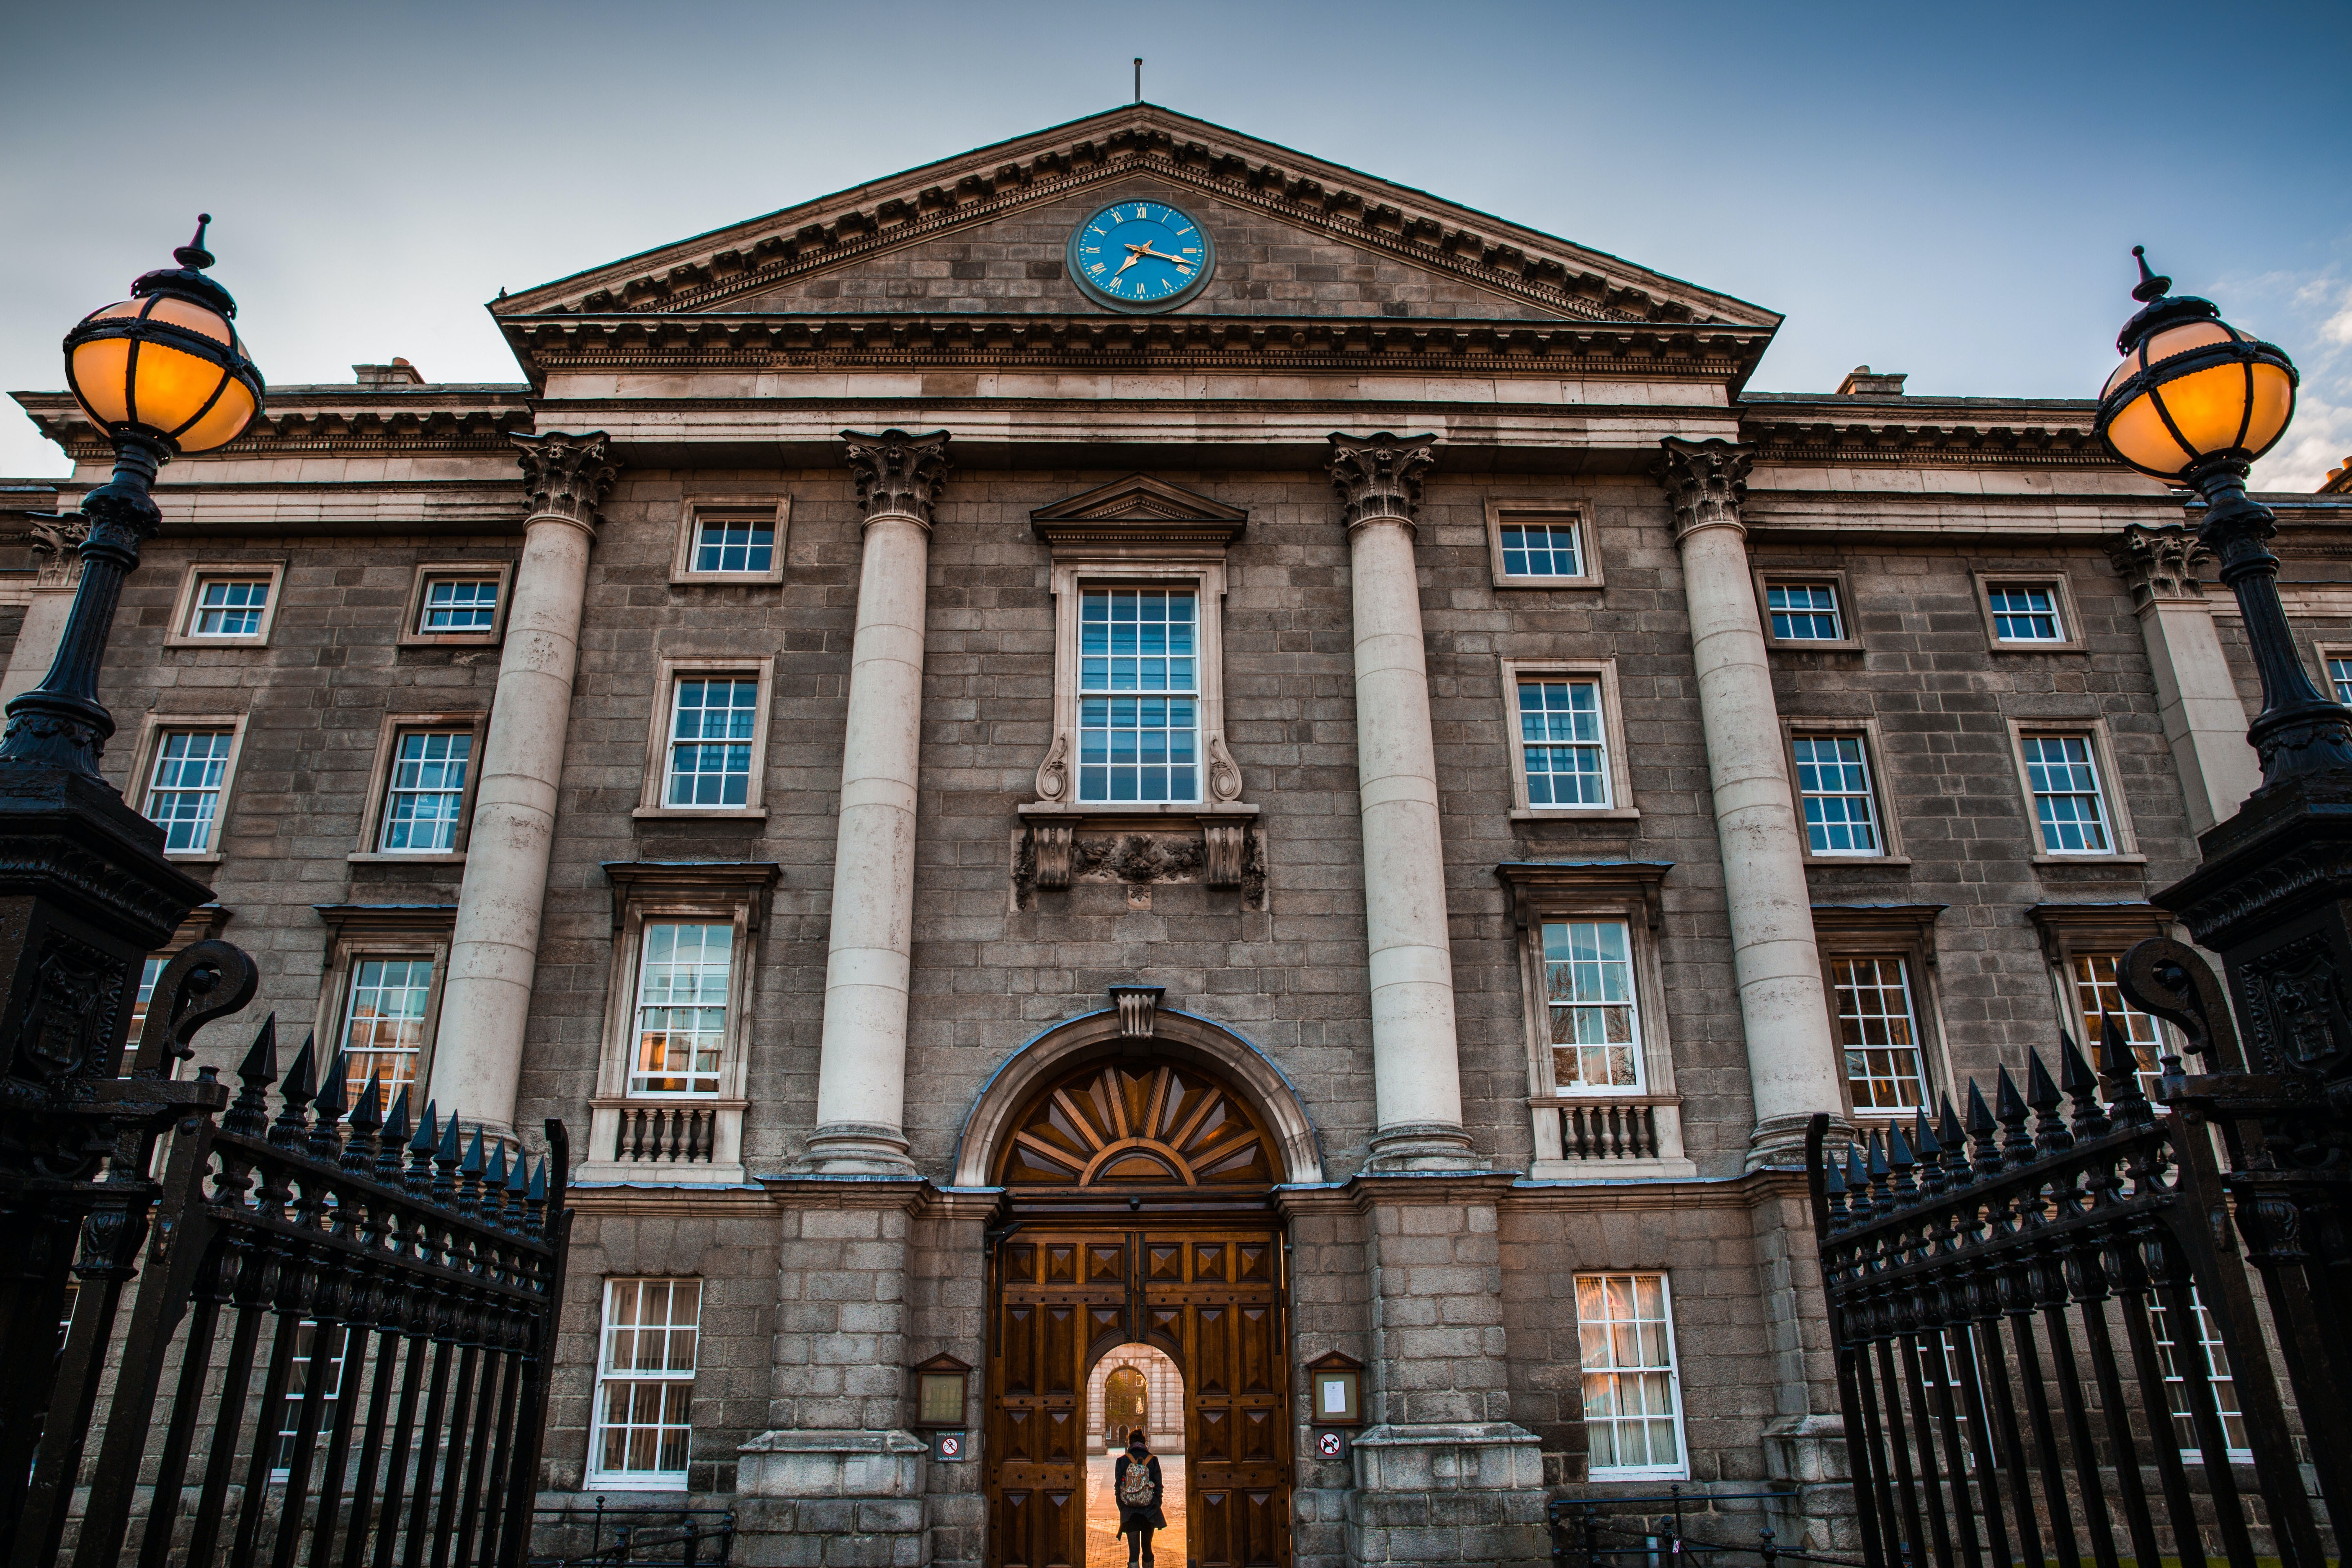 The entrance to Trinity College Dublin